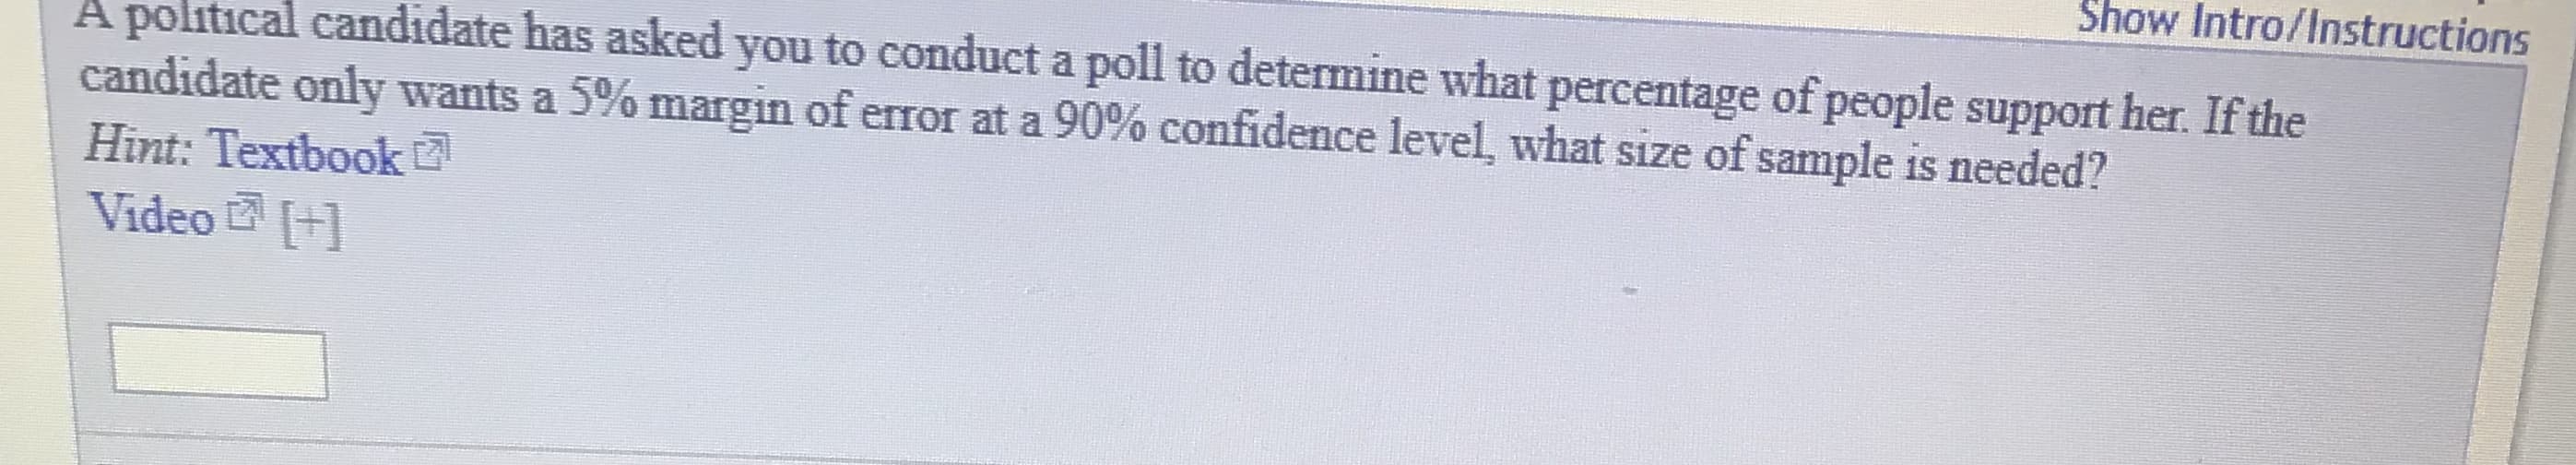 Show Intro/Instructions
A political candidate has asked you to conduct a poll to determine what percentage of people support her. If the
candidate only wants a 5% margin of error at a 90% confidence level, what size of sample is needed?
Hint: Textbook
Video +1
